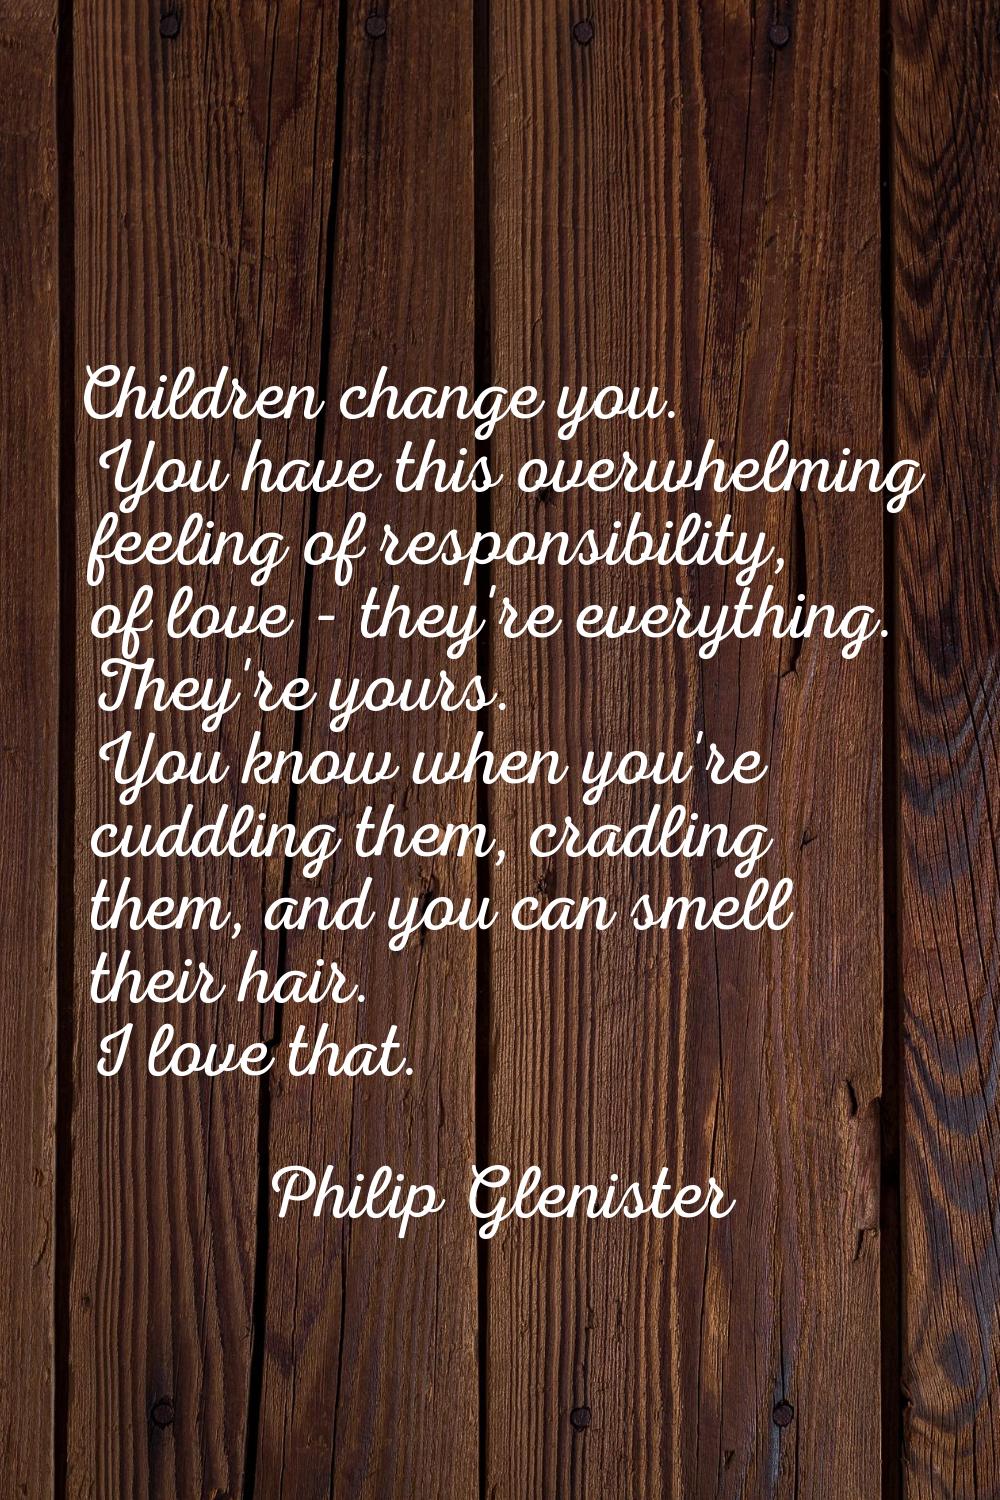 Children change you. You have this overwhelming feeling of responsibility, of love - they're everyt